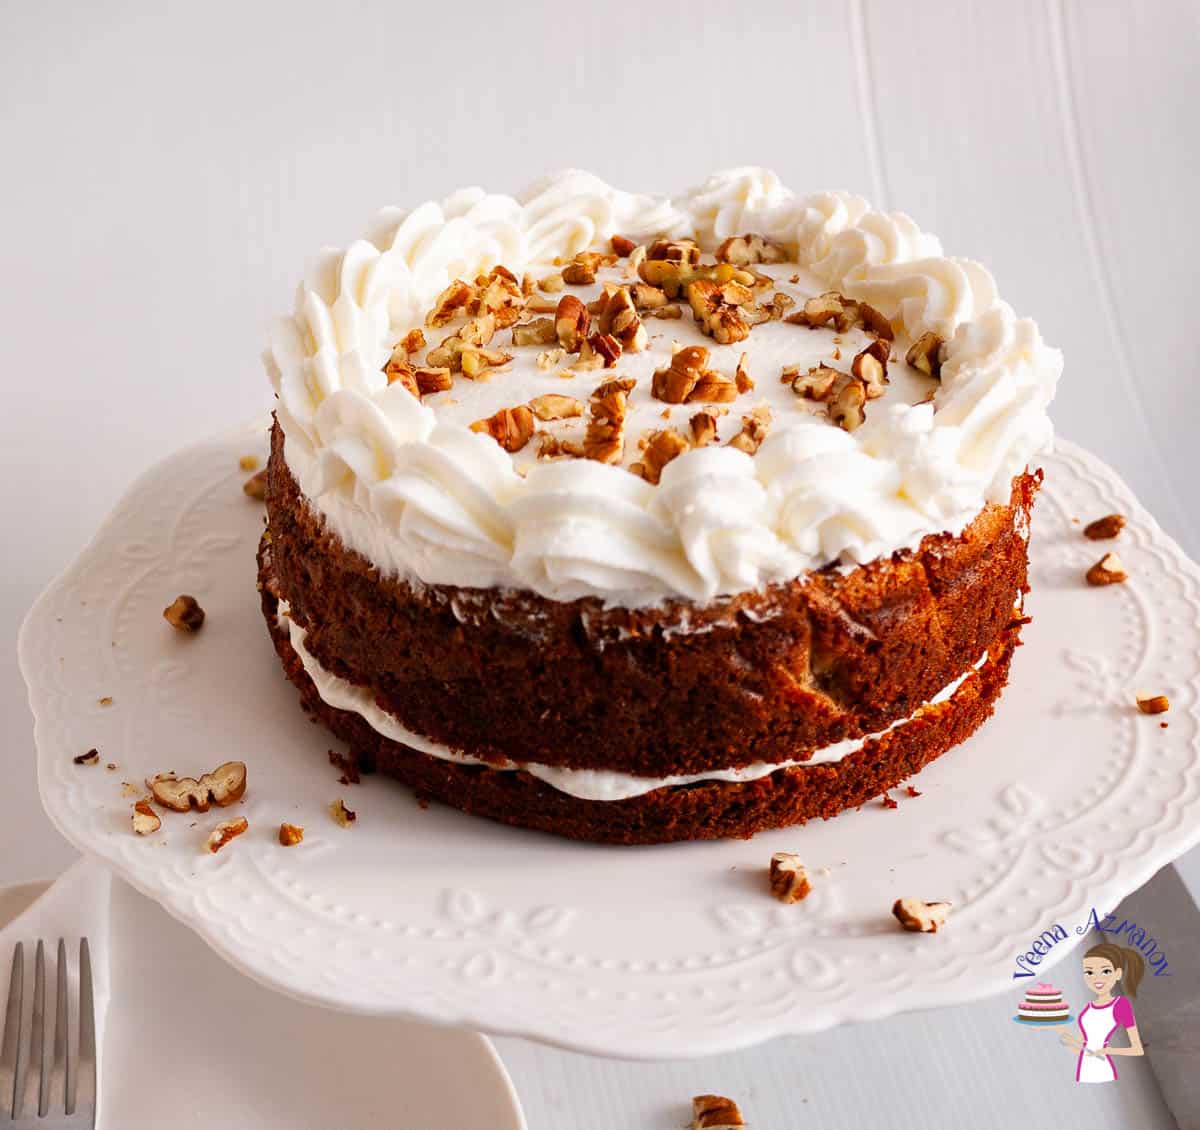 A moist carrot cake with cream cheese frosting.